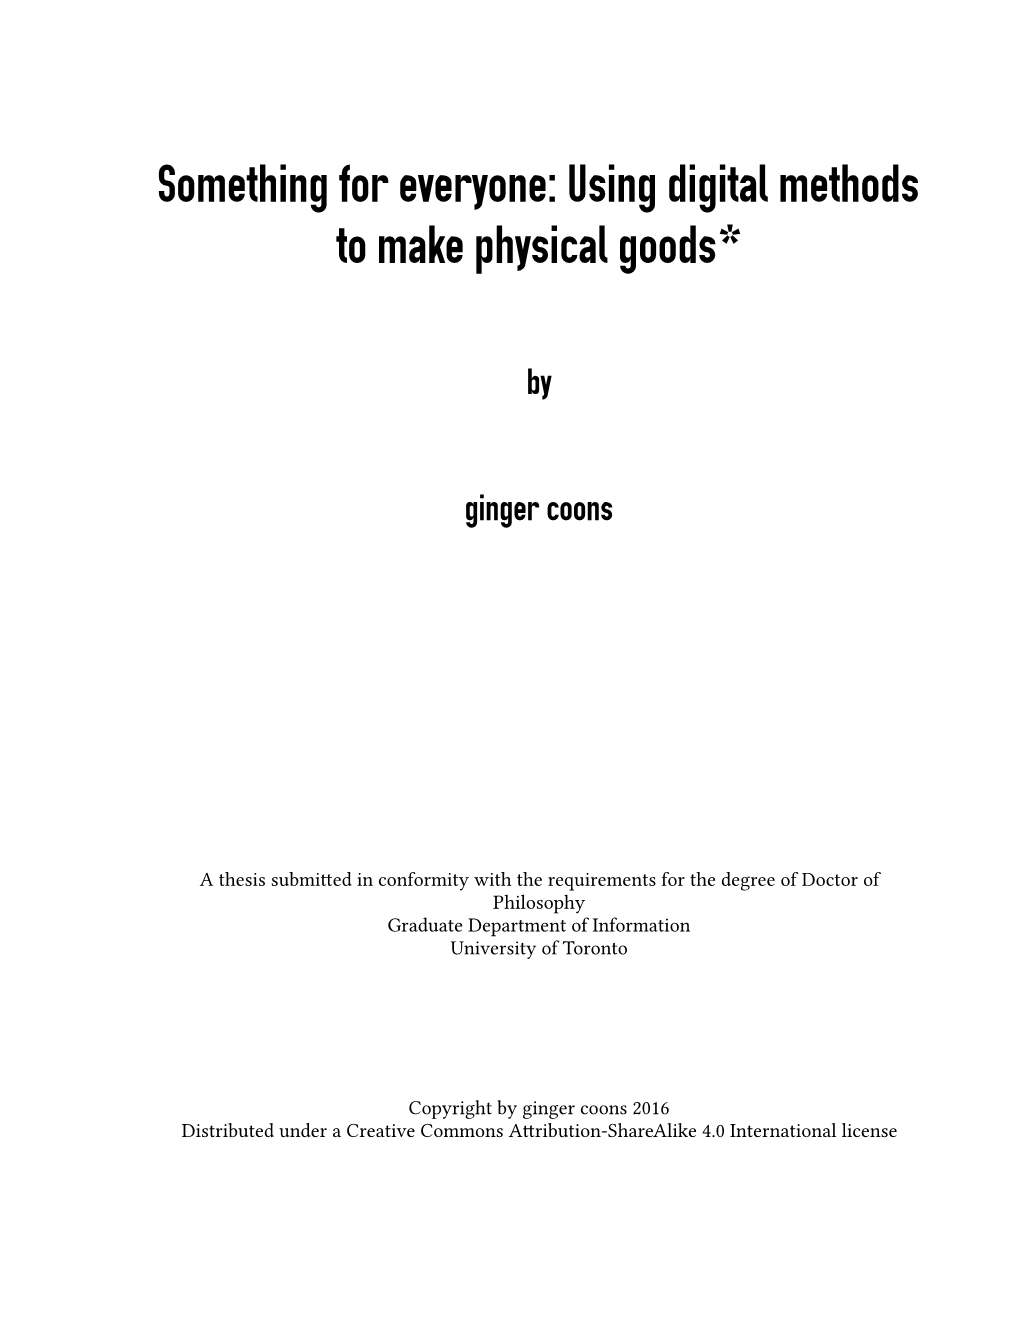 Something for Everyone: Using Digital Methods to Make Physical Goods*